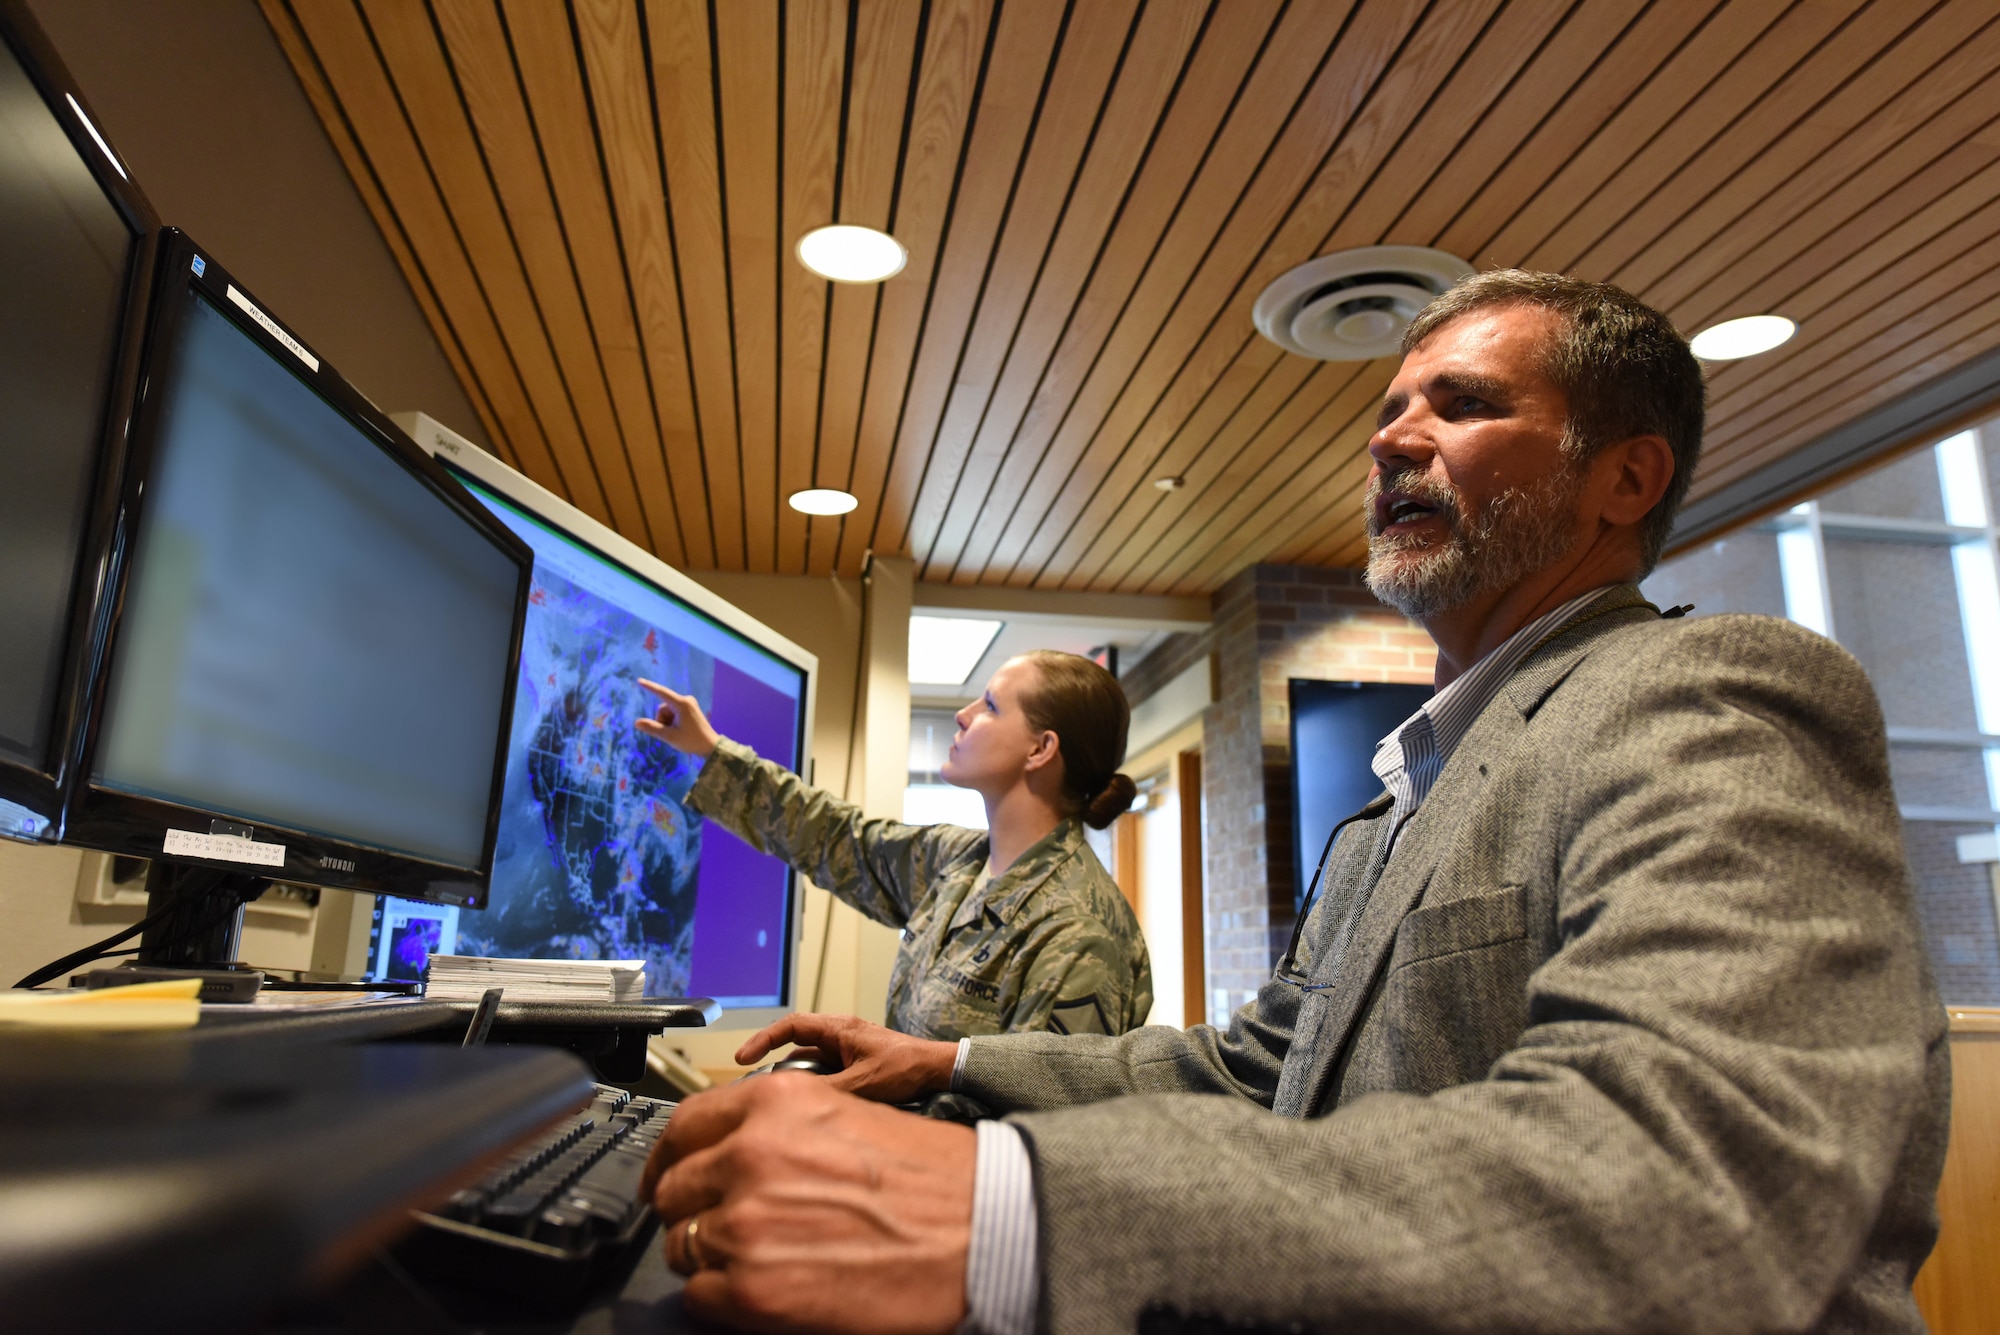 William Martin, the 28th Operations Support Squadron weather flight lead forecaster and Master Sgt. Jessica Leiker, the 28th OSS noncommissioned officer in charge of mission weather operations, observe weather forecasts at Ellsworth Air Force Base, S.D., May 29, 2018. The weather flight is responsible for providing accurate and timely weather forecasts to support operations on base which are critical to mission success. (U.S. Air Force photo by Airman 1st Class Thomas Karol)